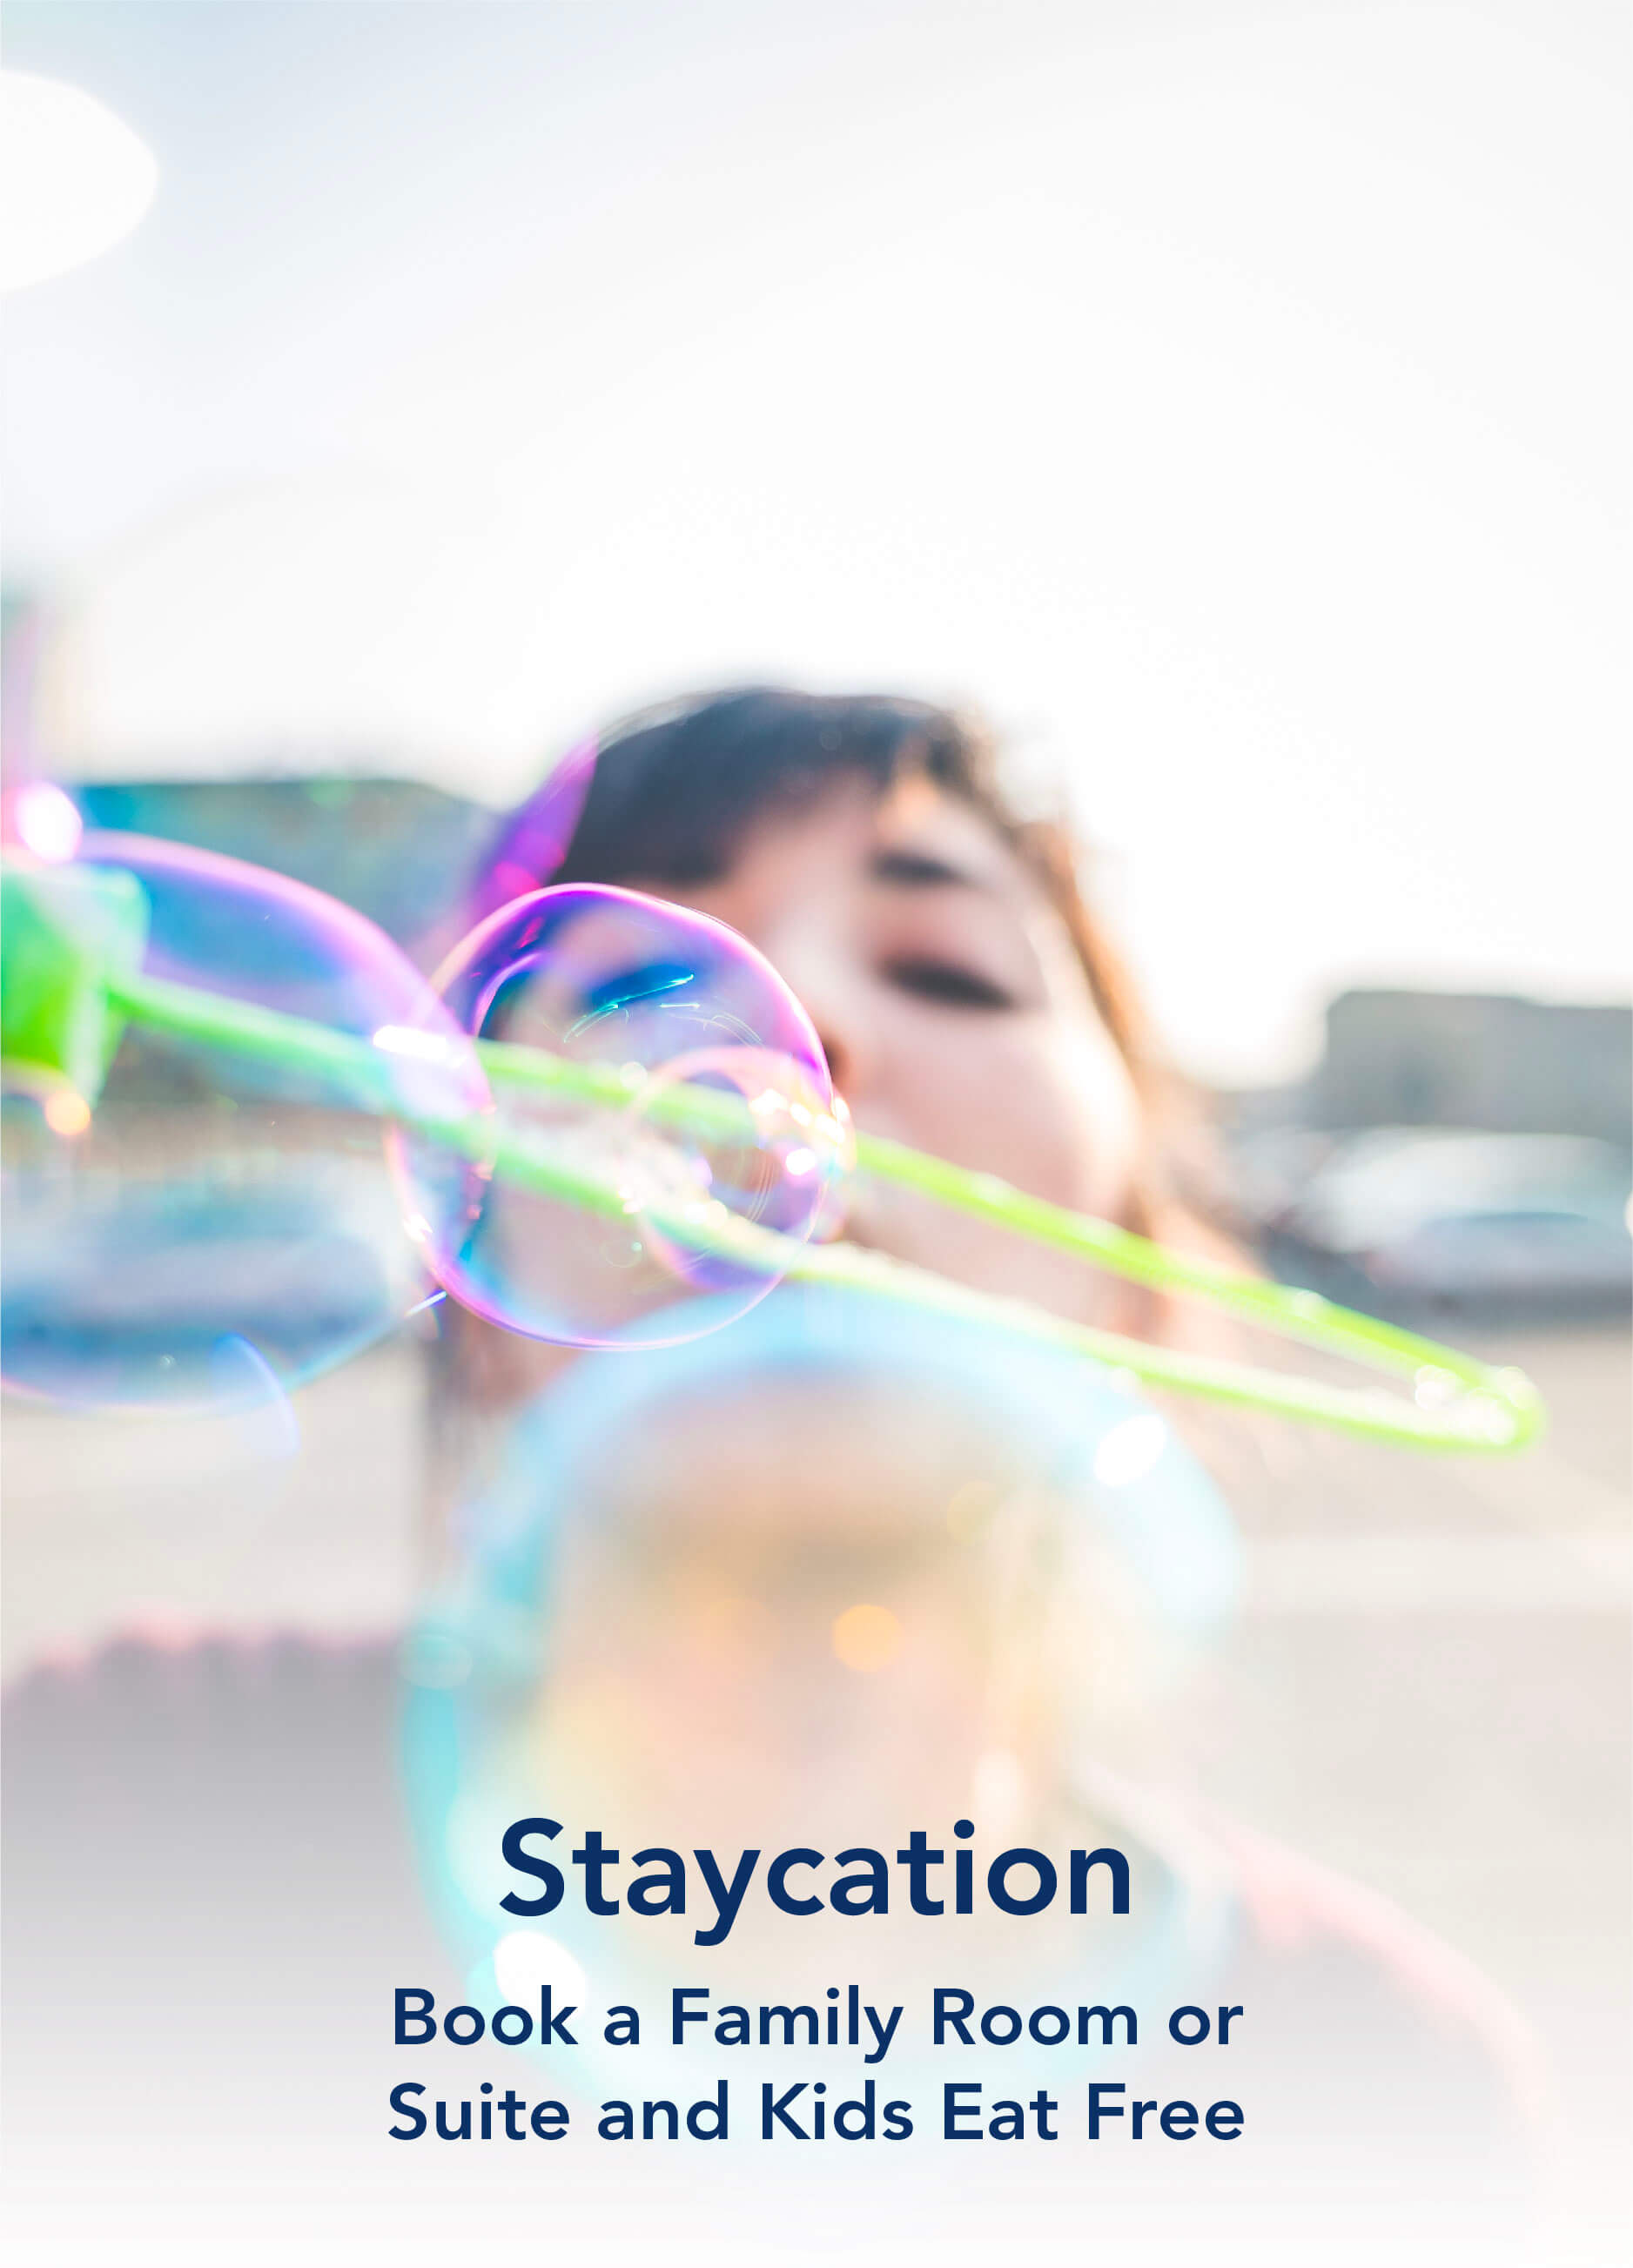 Staycation - Book a Family Room or Suite and Kids Eat Free